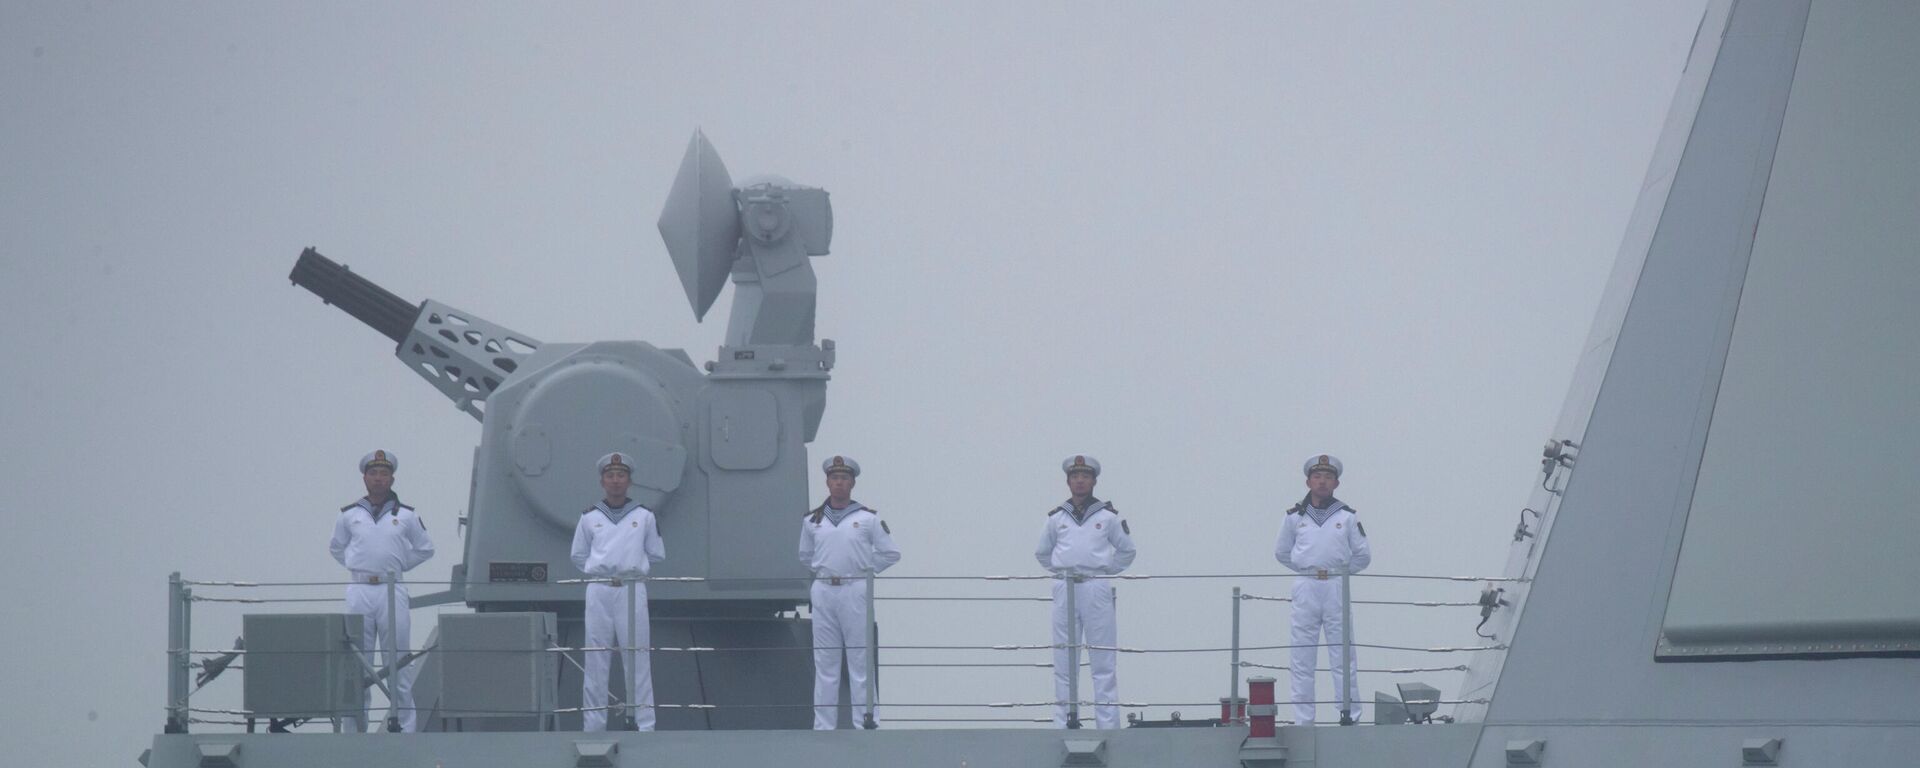 Sailors stand on the deck of the new type 055 guided-missile destroyer Nanchang of the Chinese People's Liberation Army (PLA) Navy as it participates in a naval parade to commemorate the 70th anniversary of the founding of China's PLA Navy in the sea near Qingdao in eastern China's Shandong province, Tuesday, April 23, 2019 - Sputnik International, 1920, 06.06.2022